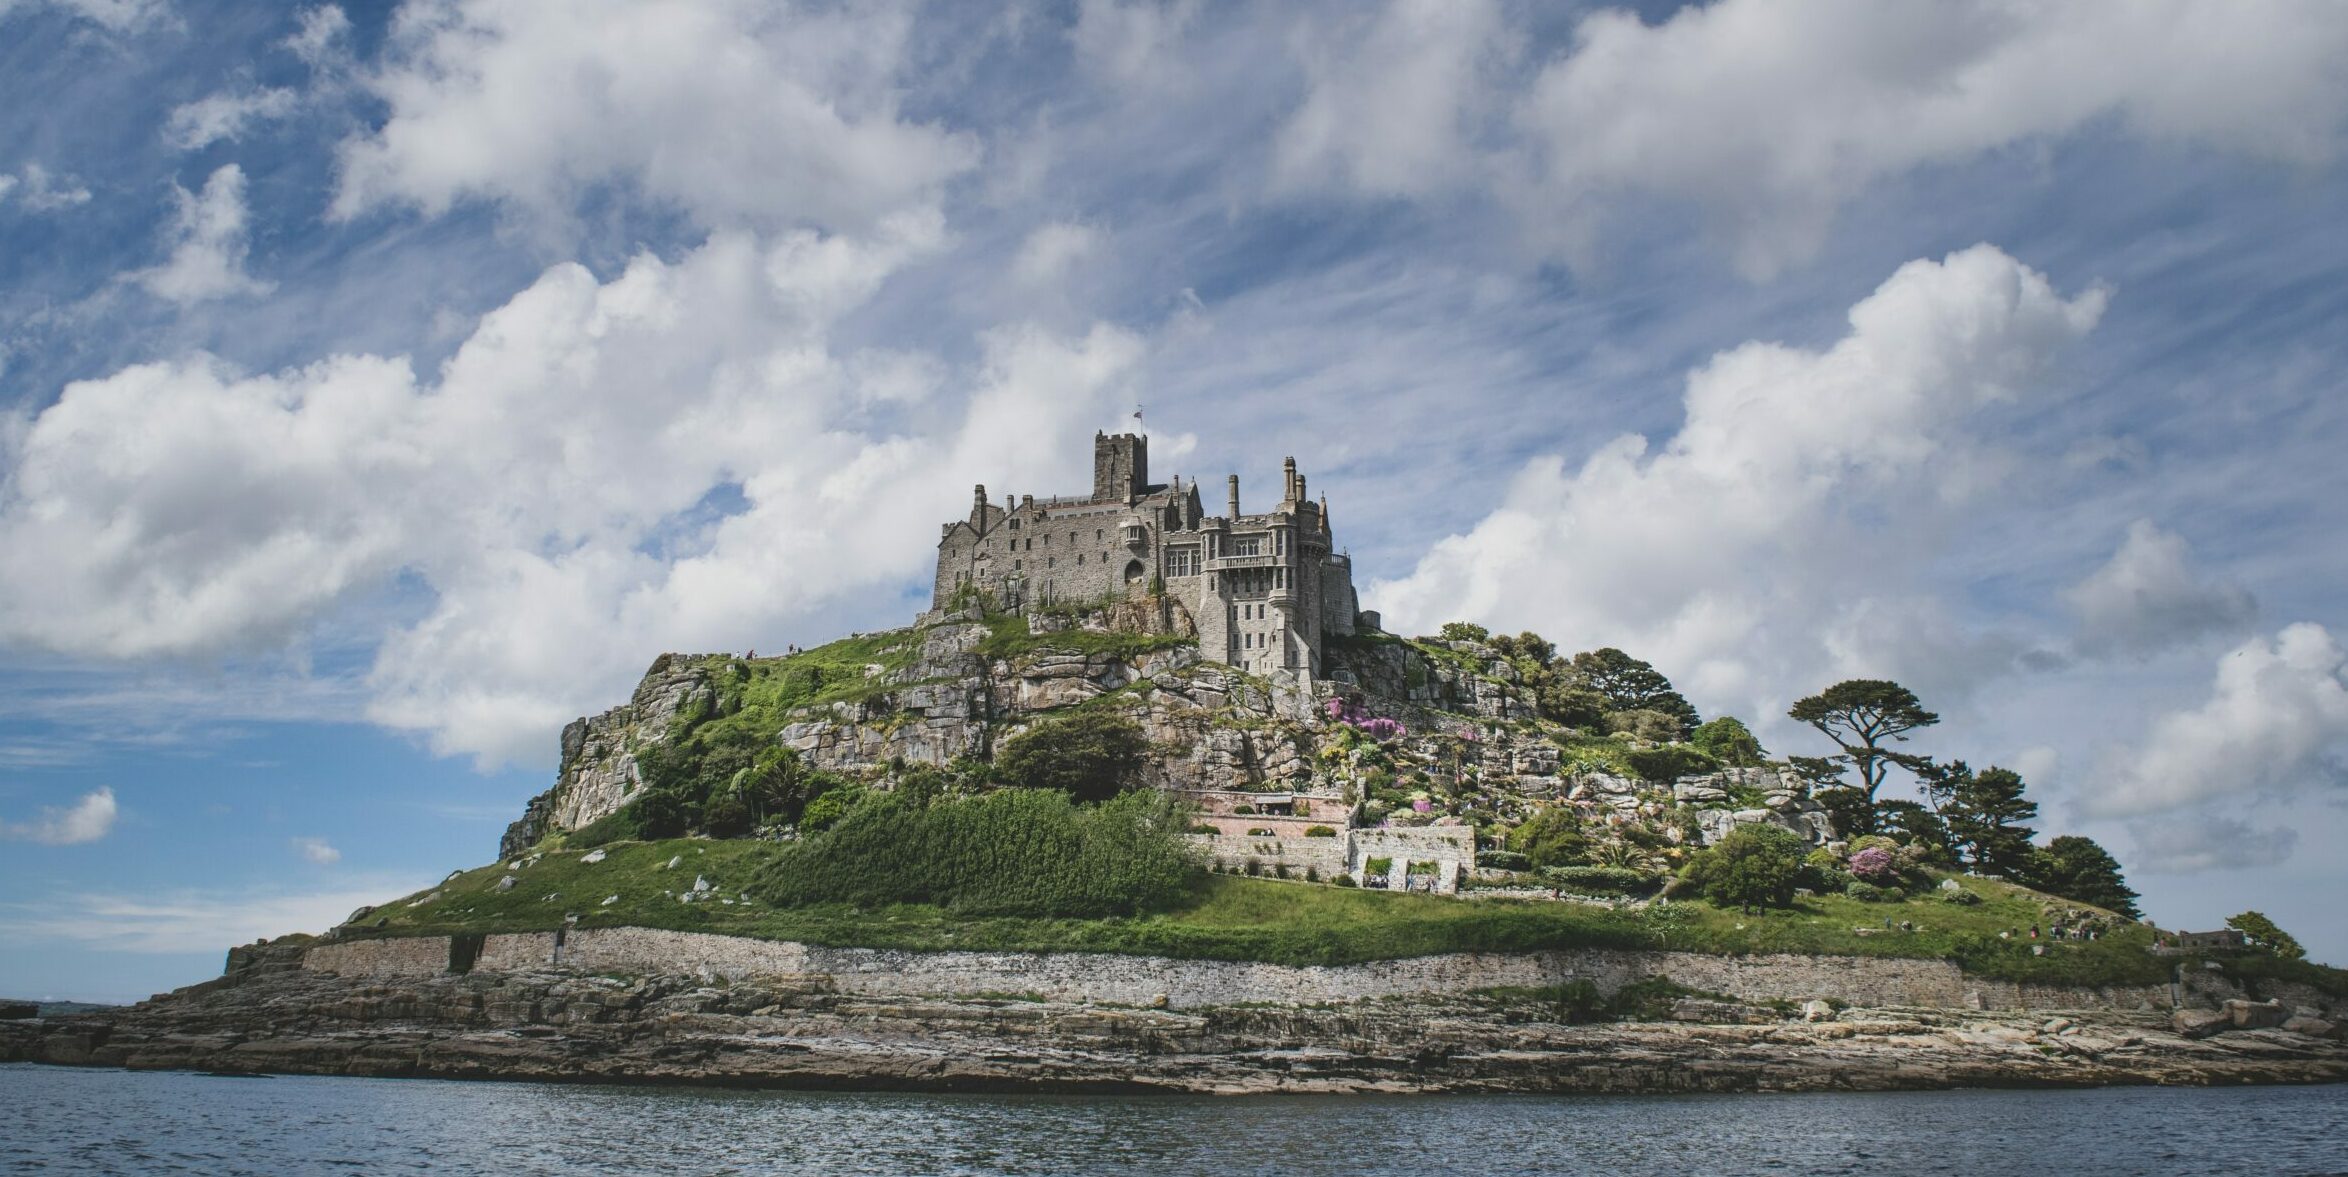 house of the dragon - st michaels mount